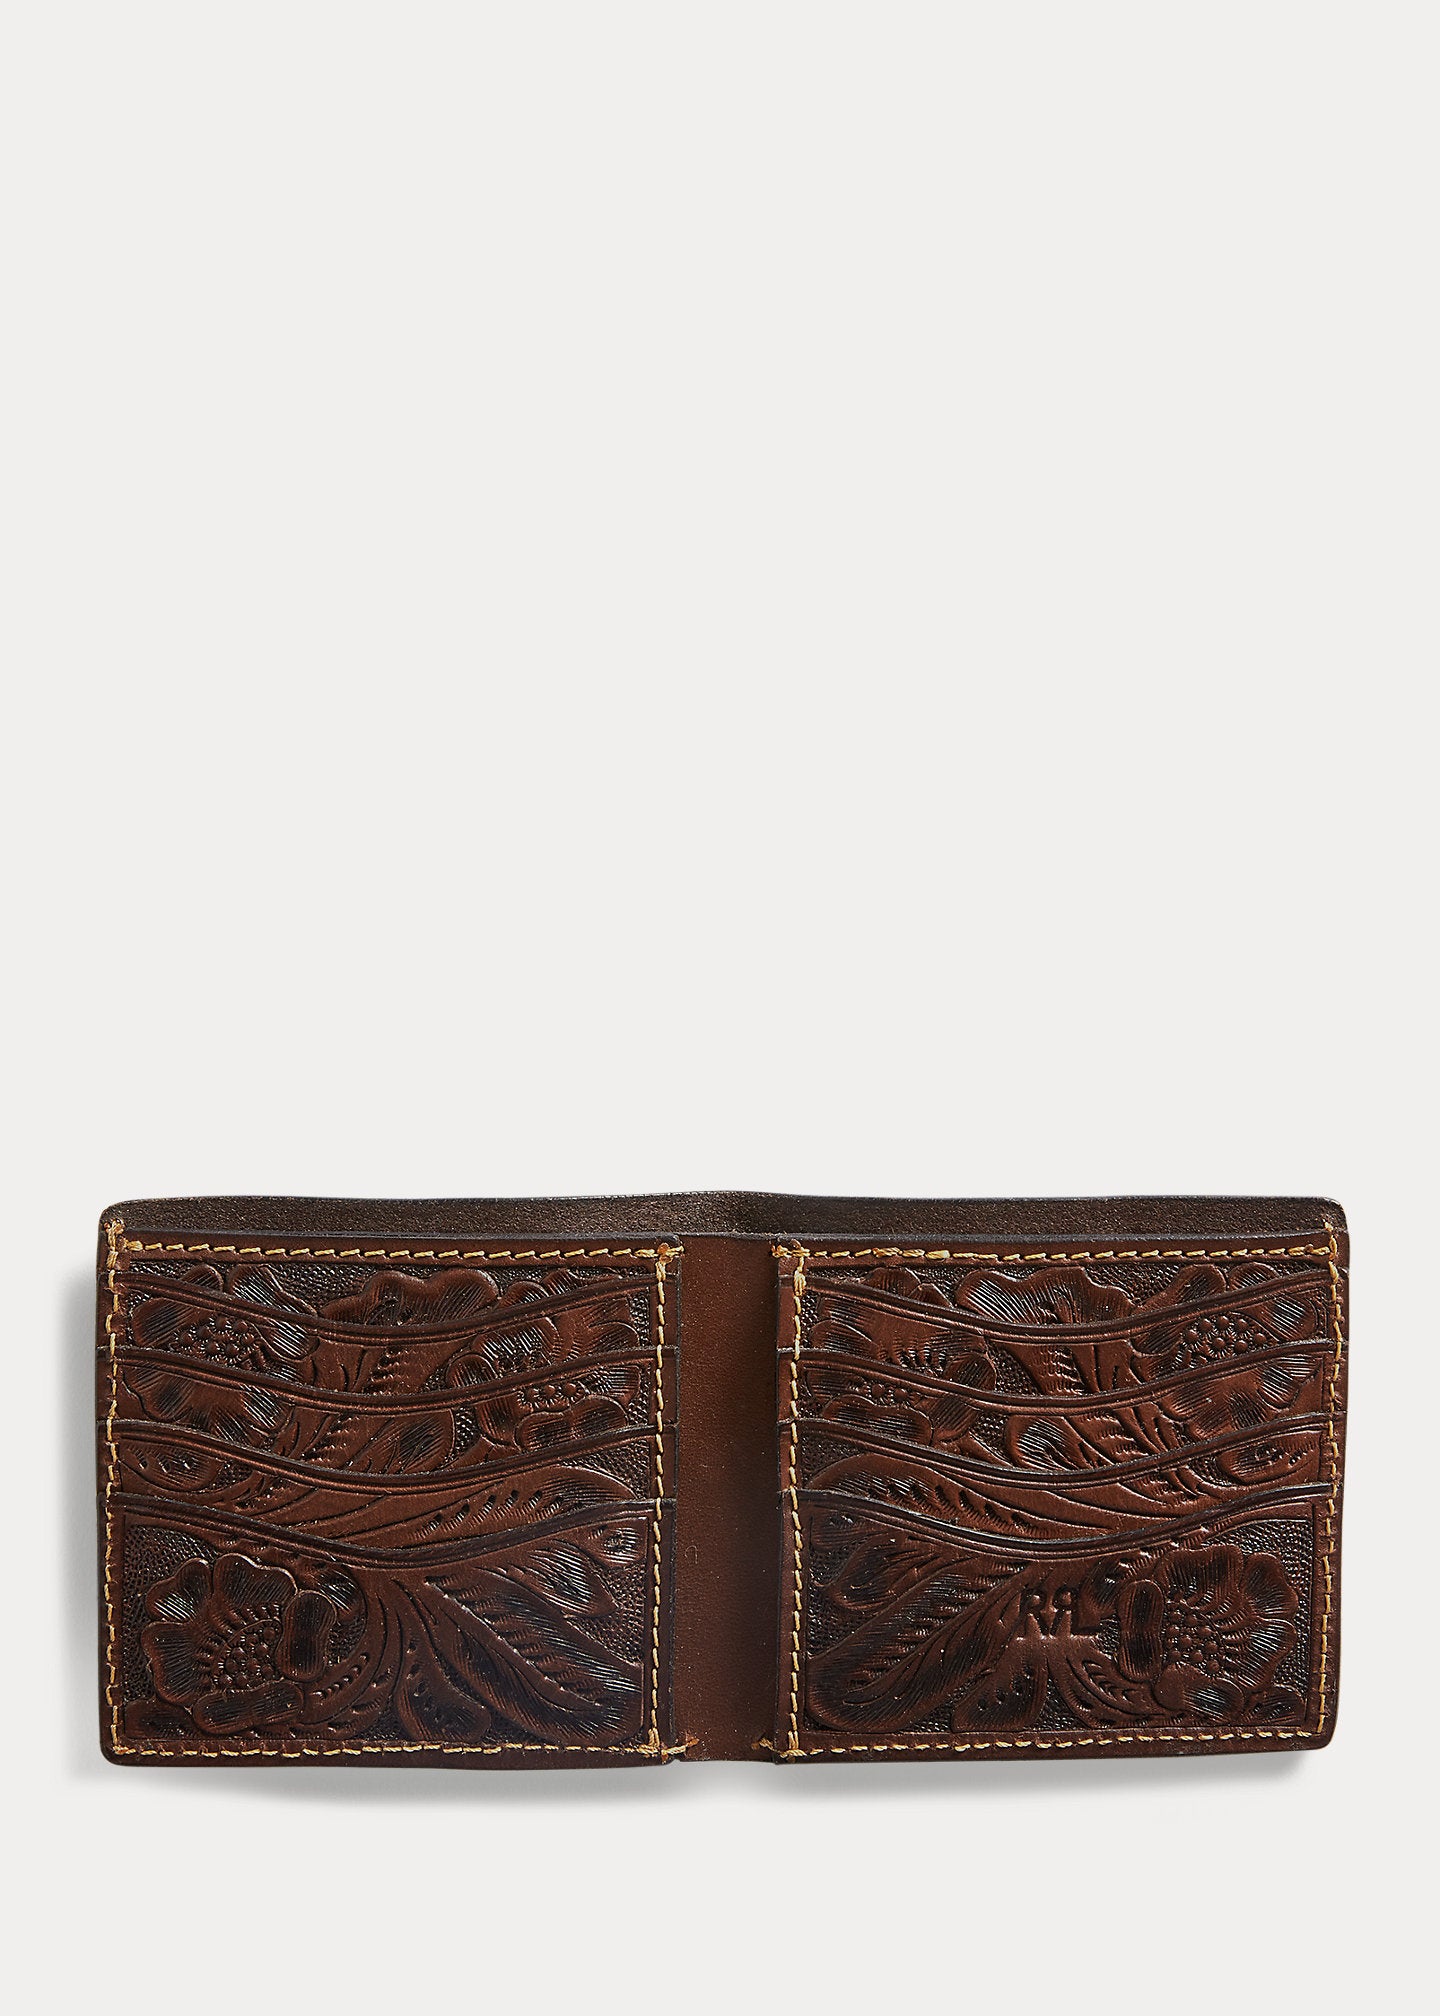 Hand-Tooled Leather Billfold